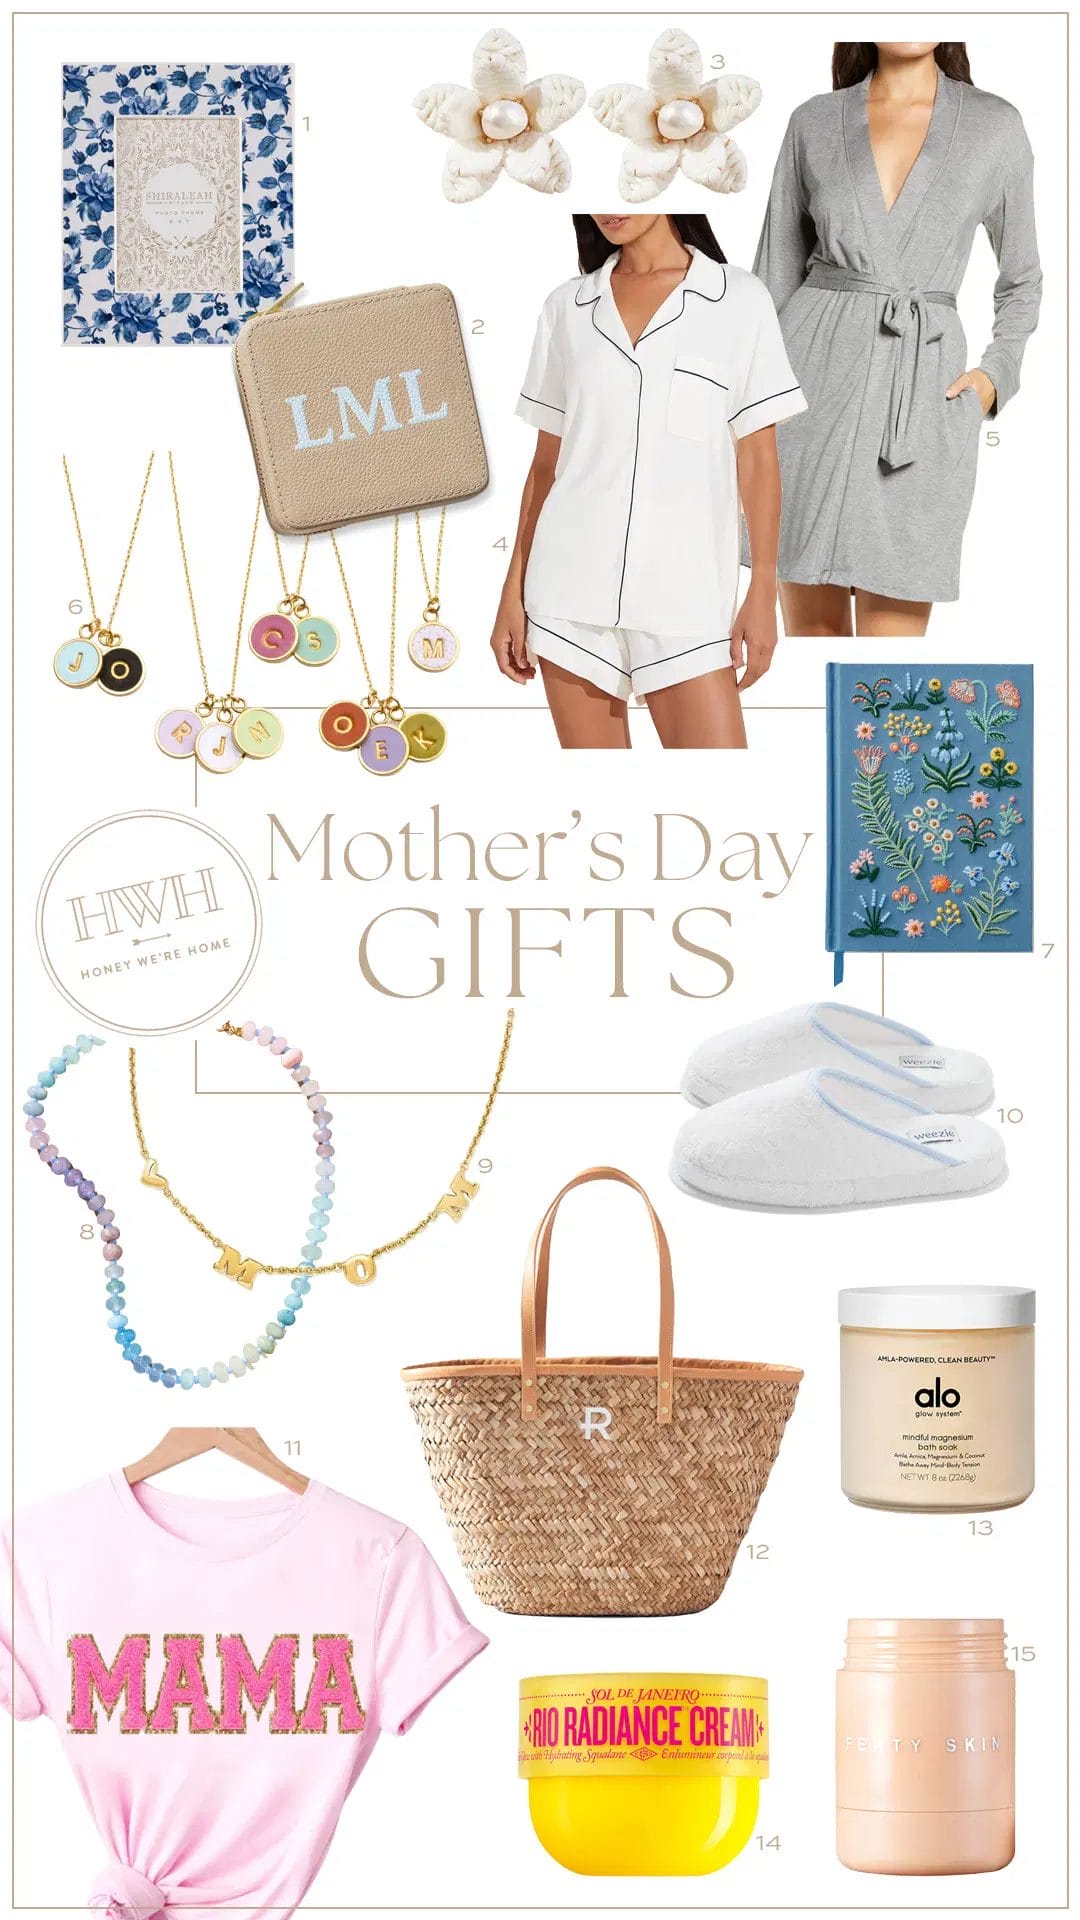 Best Mother's Day Gifts with Amazon Prime Now! - By Lauren M